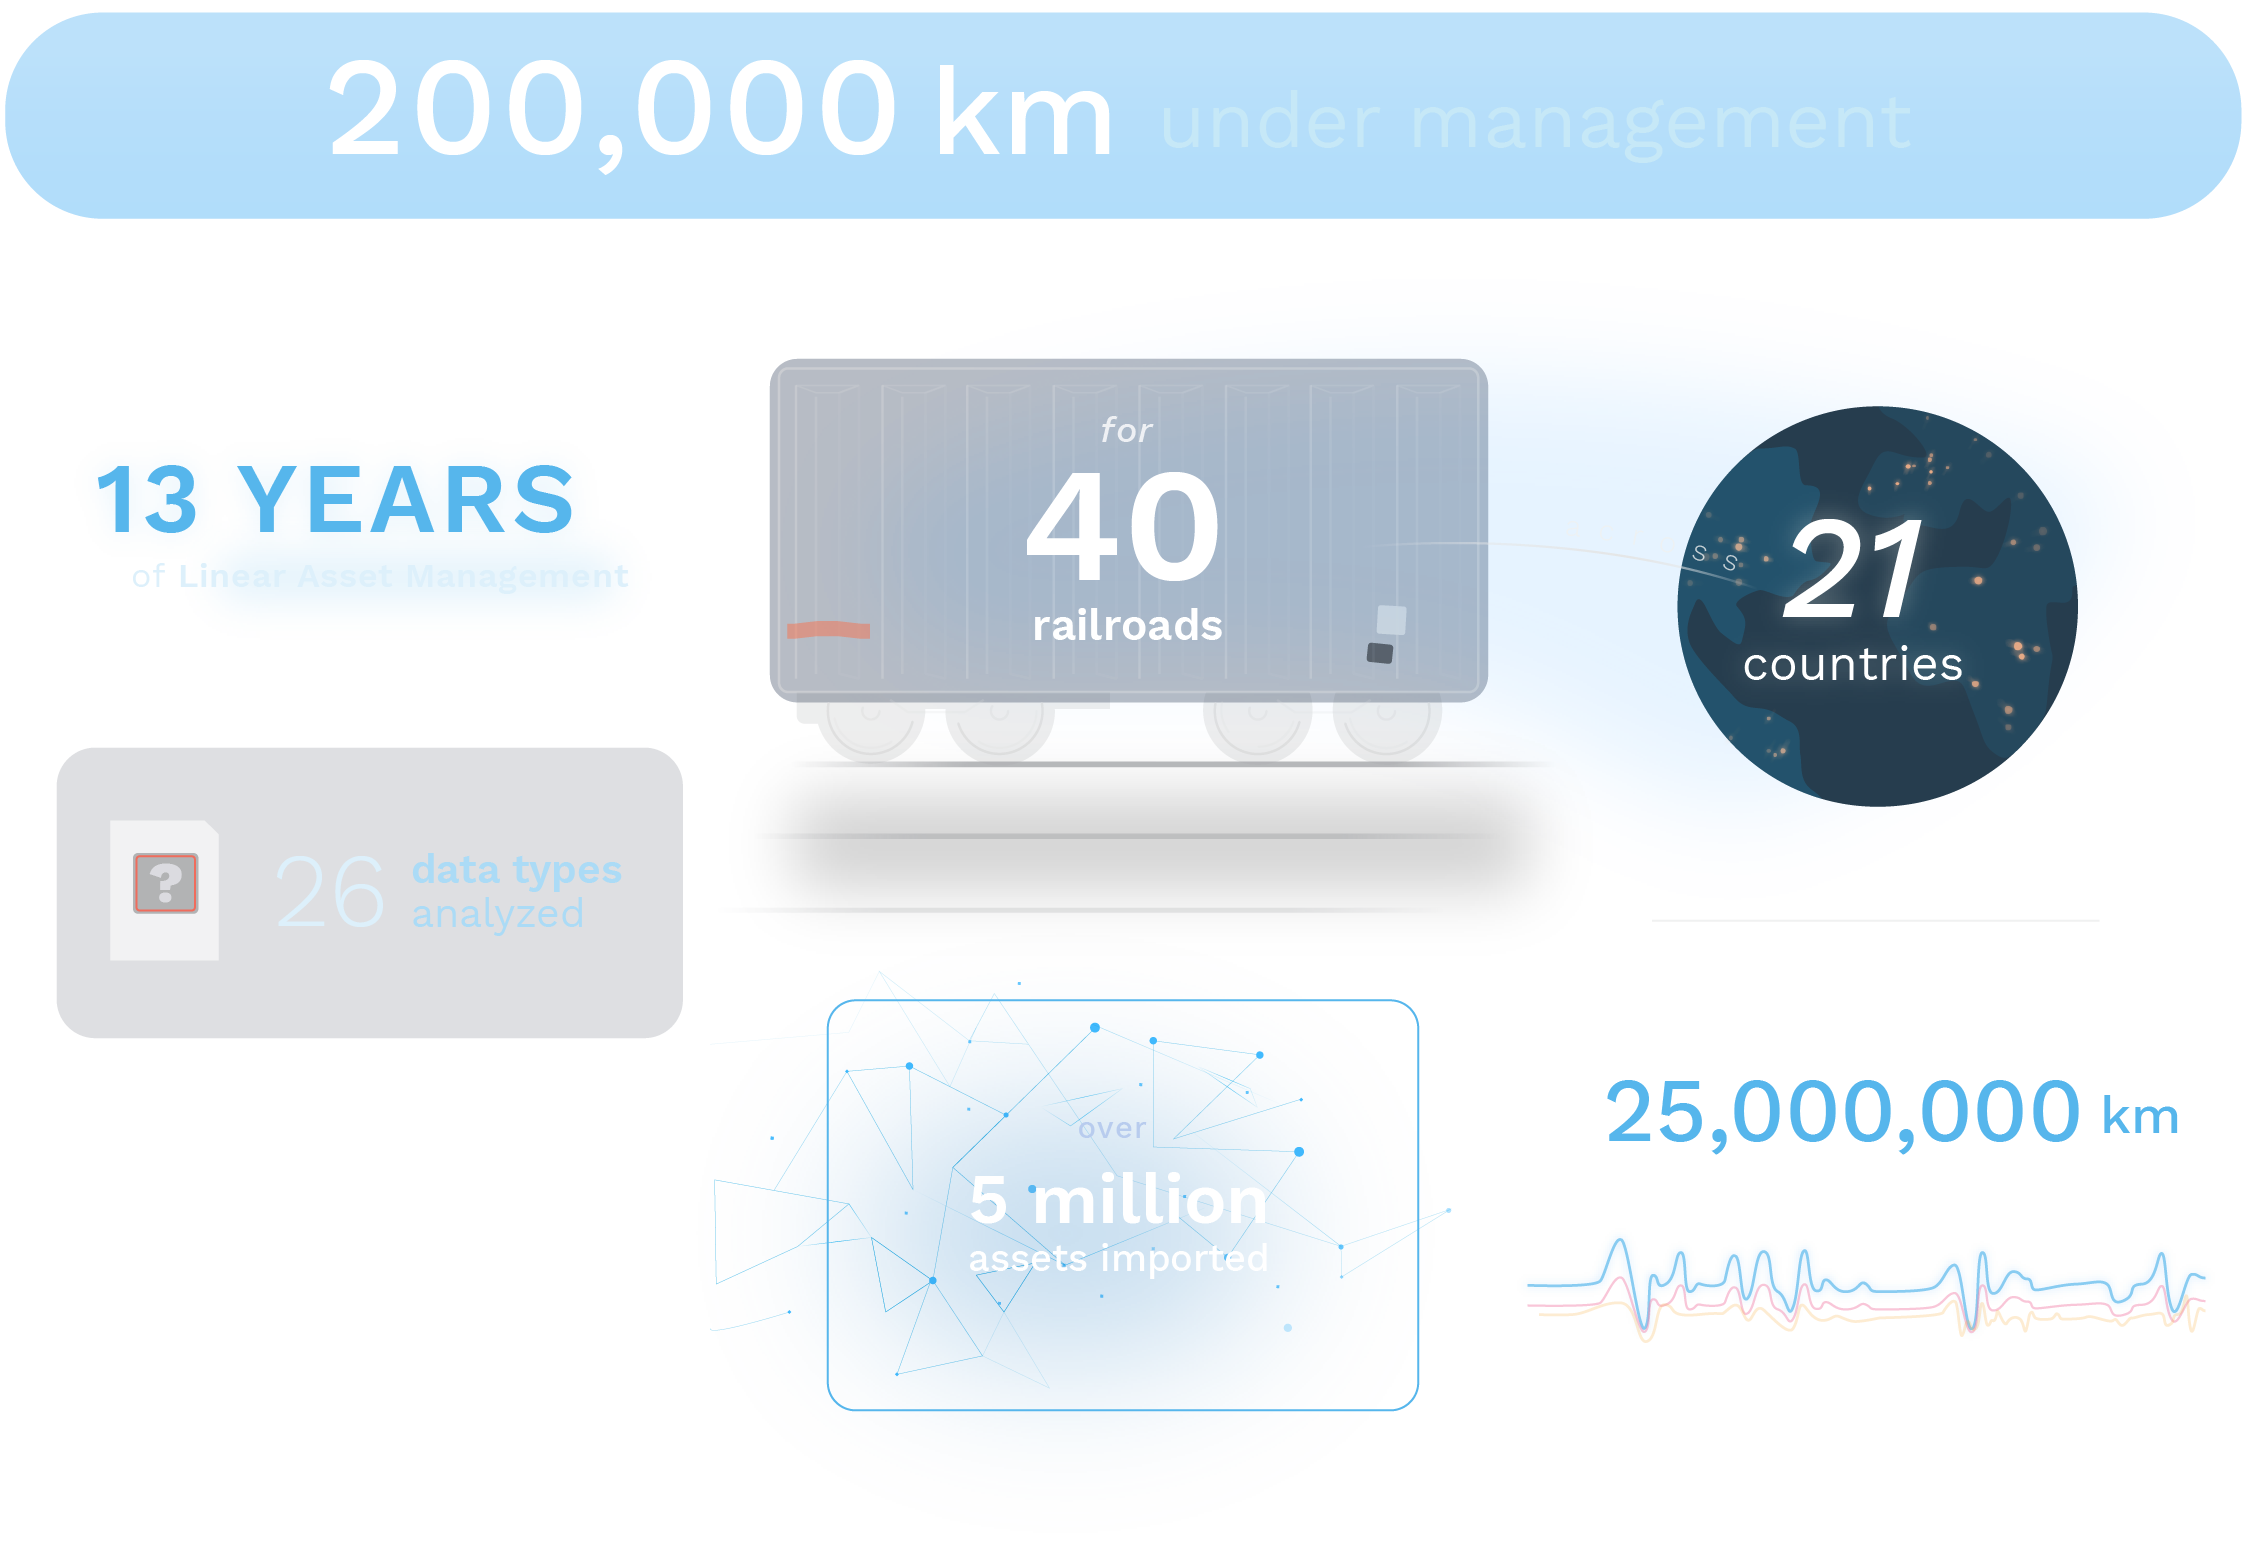 Graphic showing statistics about the company's history: 200,000 km under management; 13 years of Linear Asset Management for 40 railroads across 21 countries; 26 data types analyzed; 6.5 virtual machines deployed; over 5 million assets imported; 25,000,000 km of historic data runs